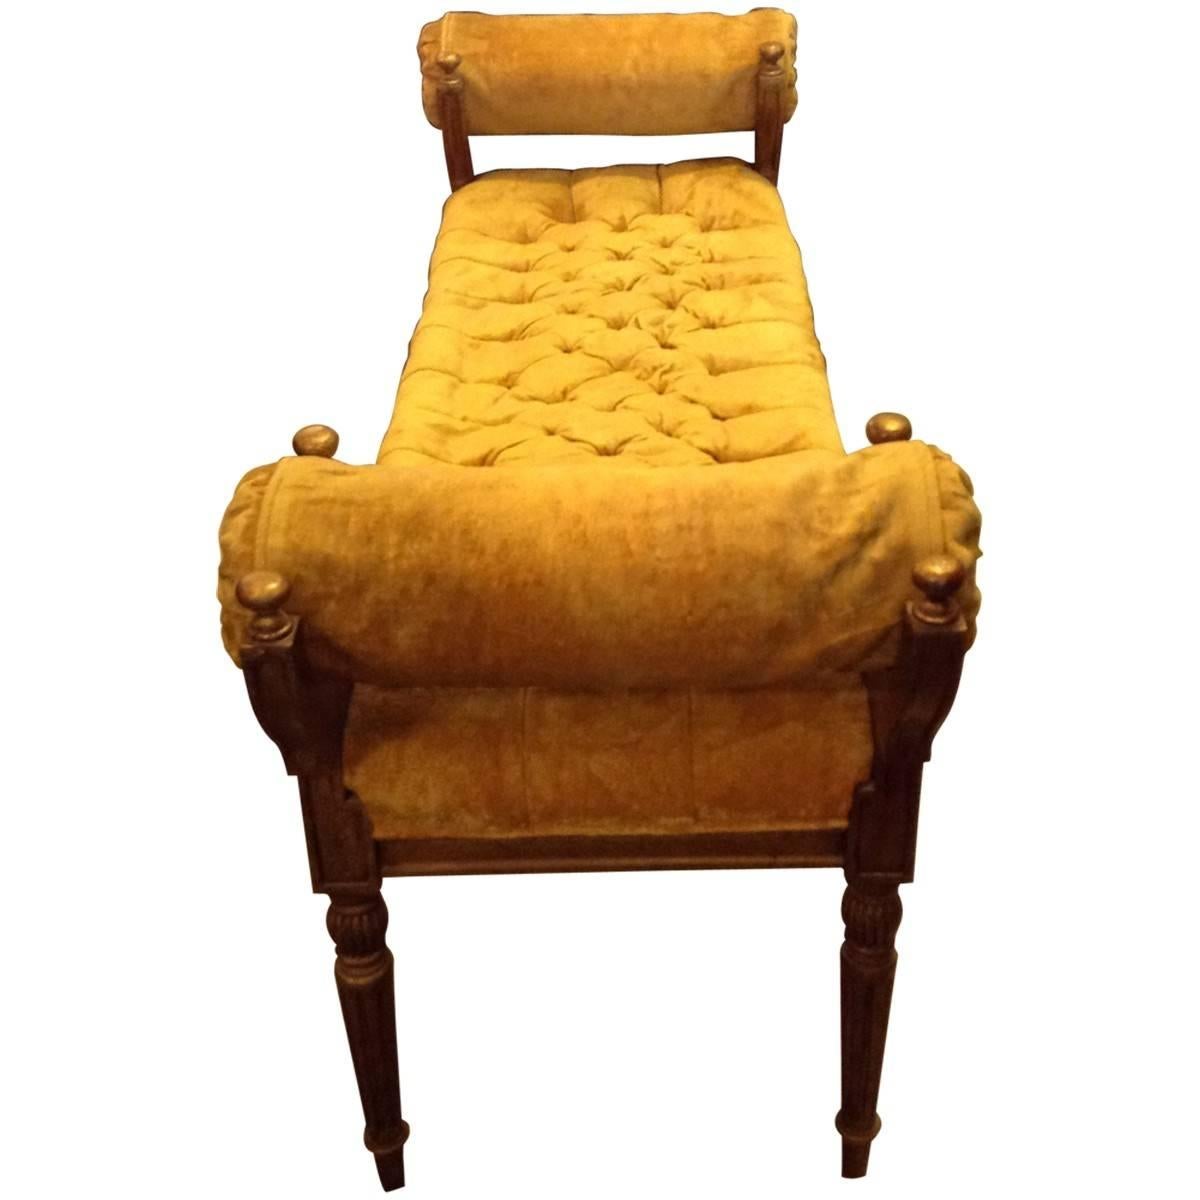 Traditional furniture is perfect for home designers looking to create a comfortable and timeless sophistication in their households. Plush seating with a sophisticated spin, this tightly upholstered bench is clad in honeydew velvet and features a